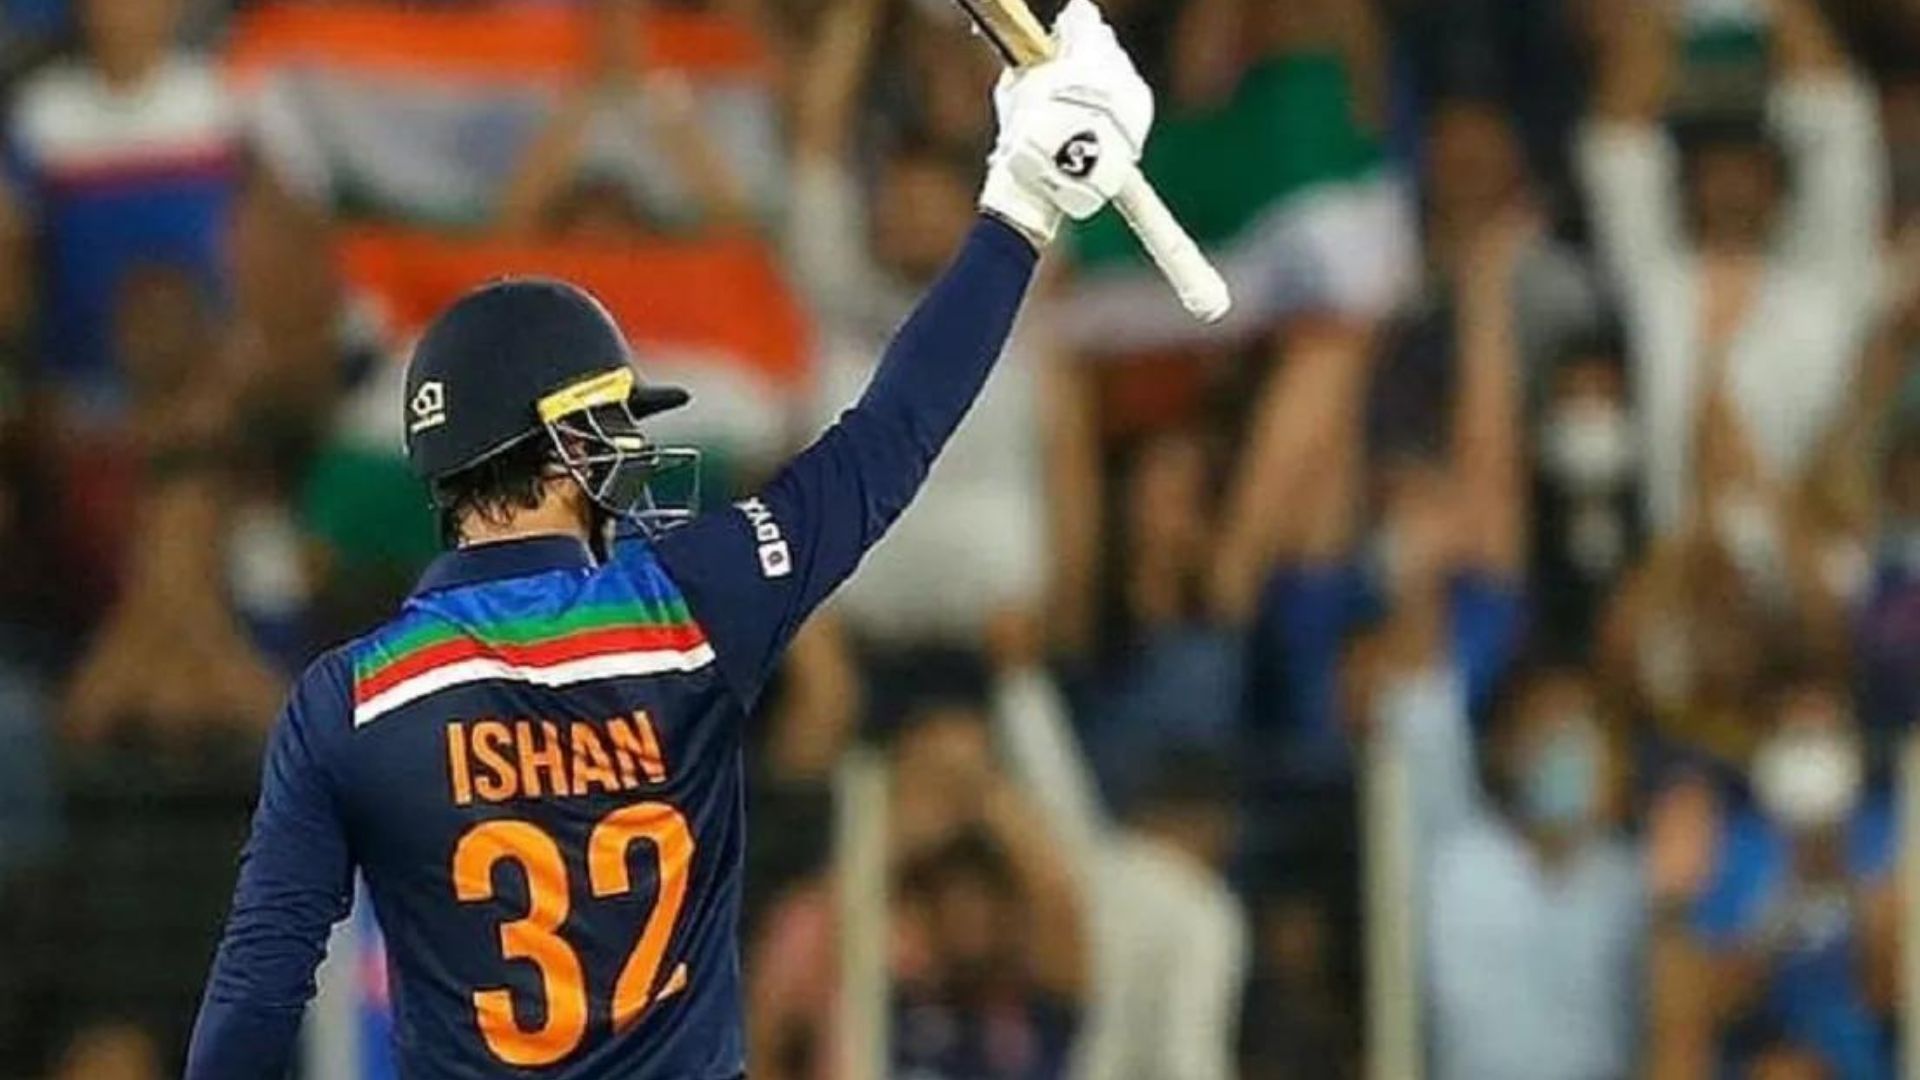 Ishan Kishan wears jersey number 32 for Team India. (P.C.:Twitter)